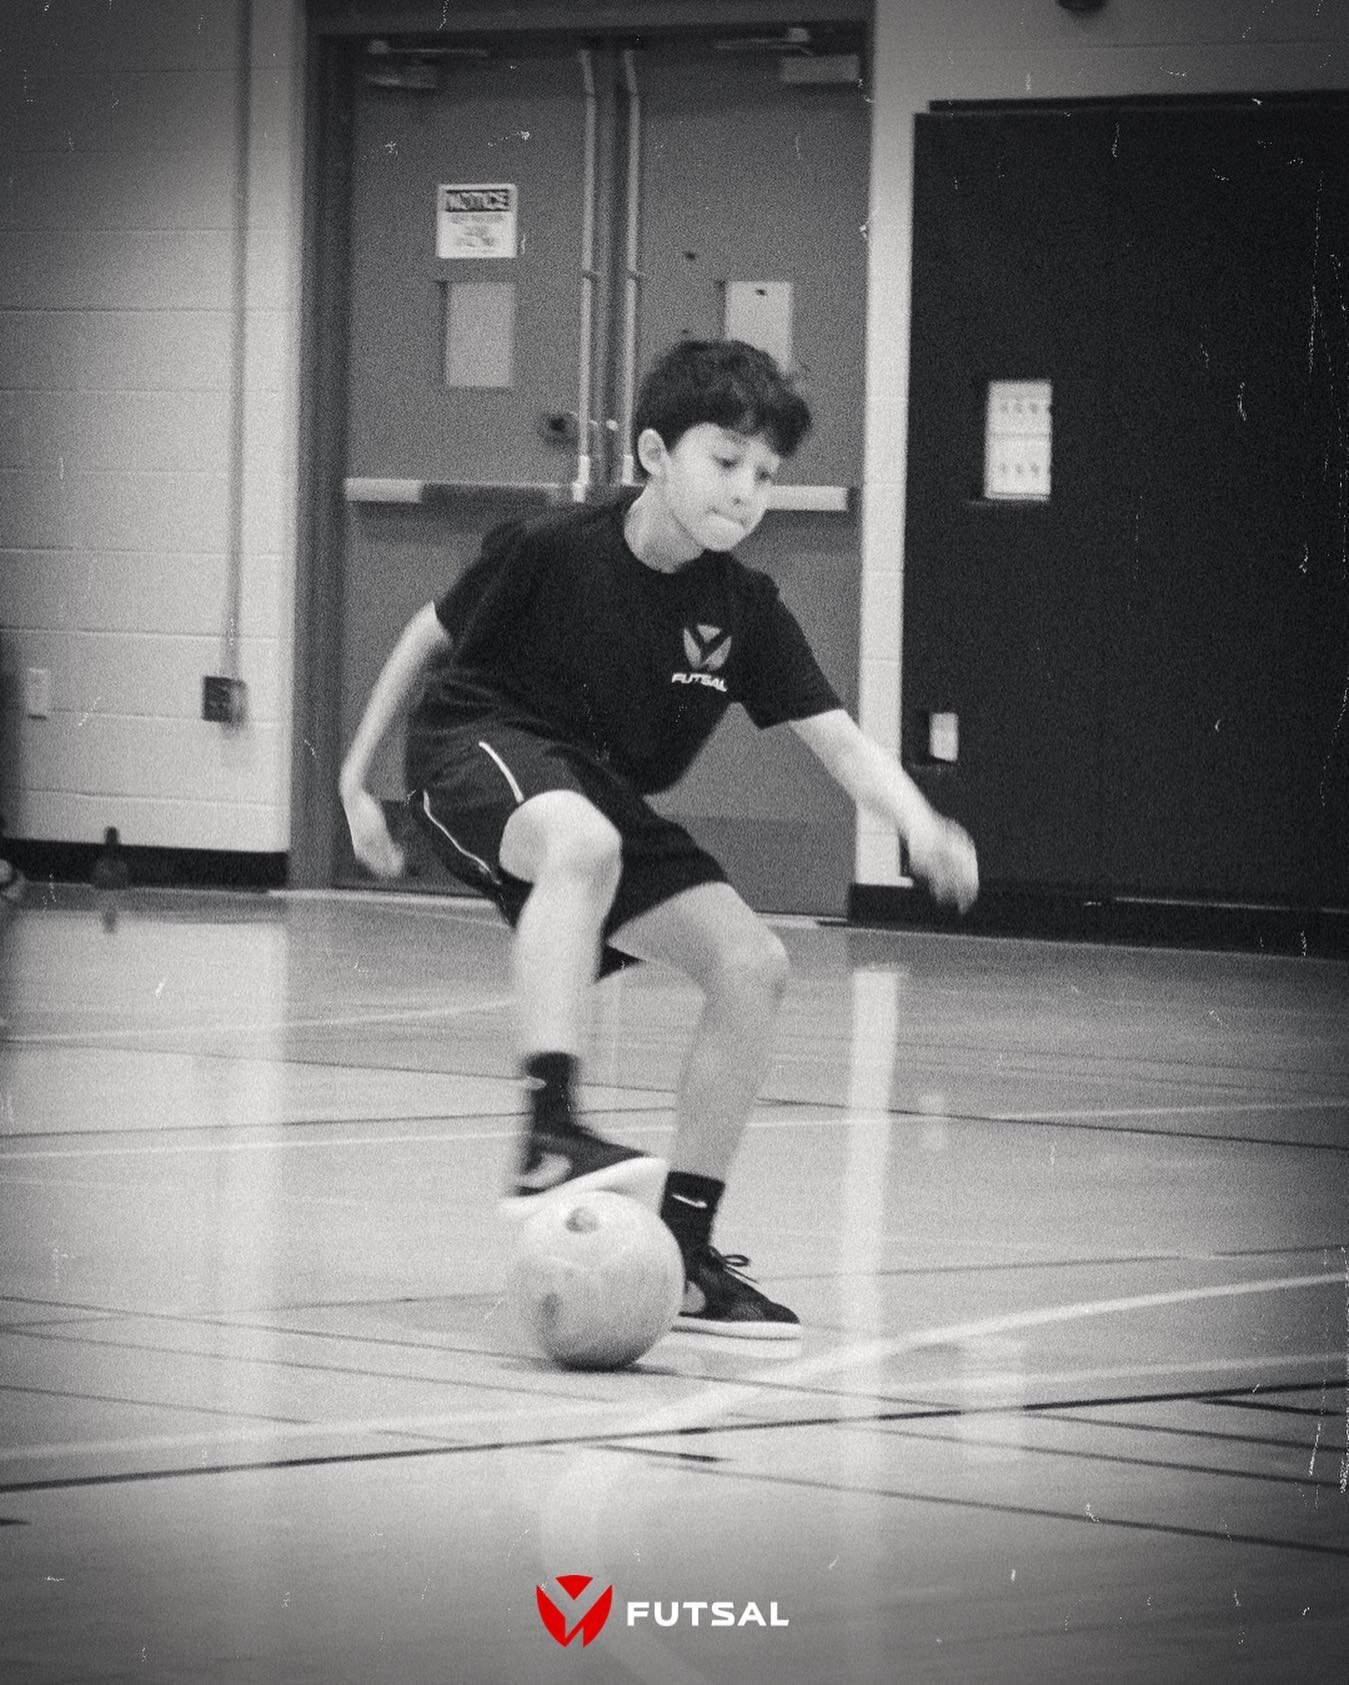 It's all about showing up, having a positive attitude, and giving your best.

⚡️⚽️

#Yfutsal
#Chicago 
#PlayerDevelopment